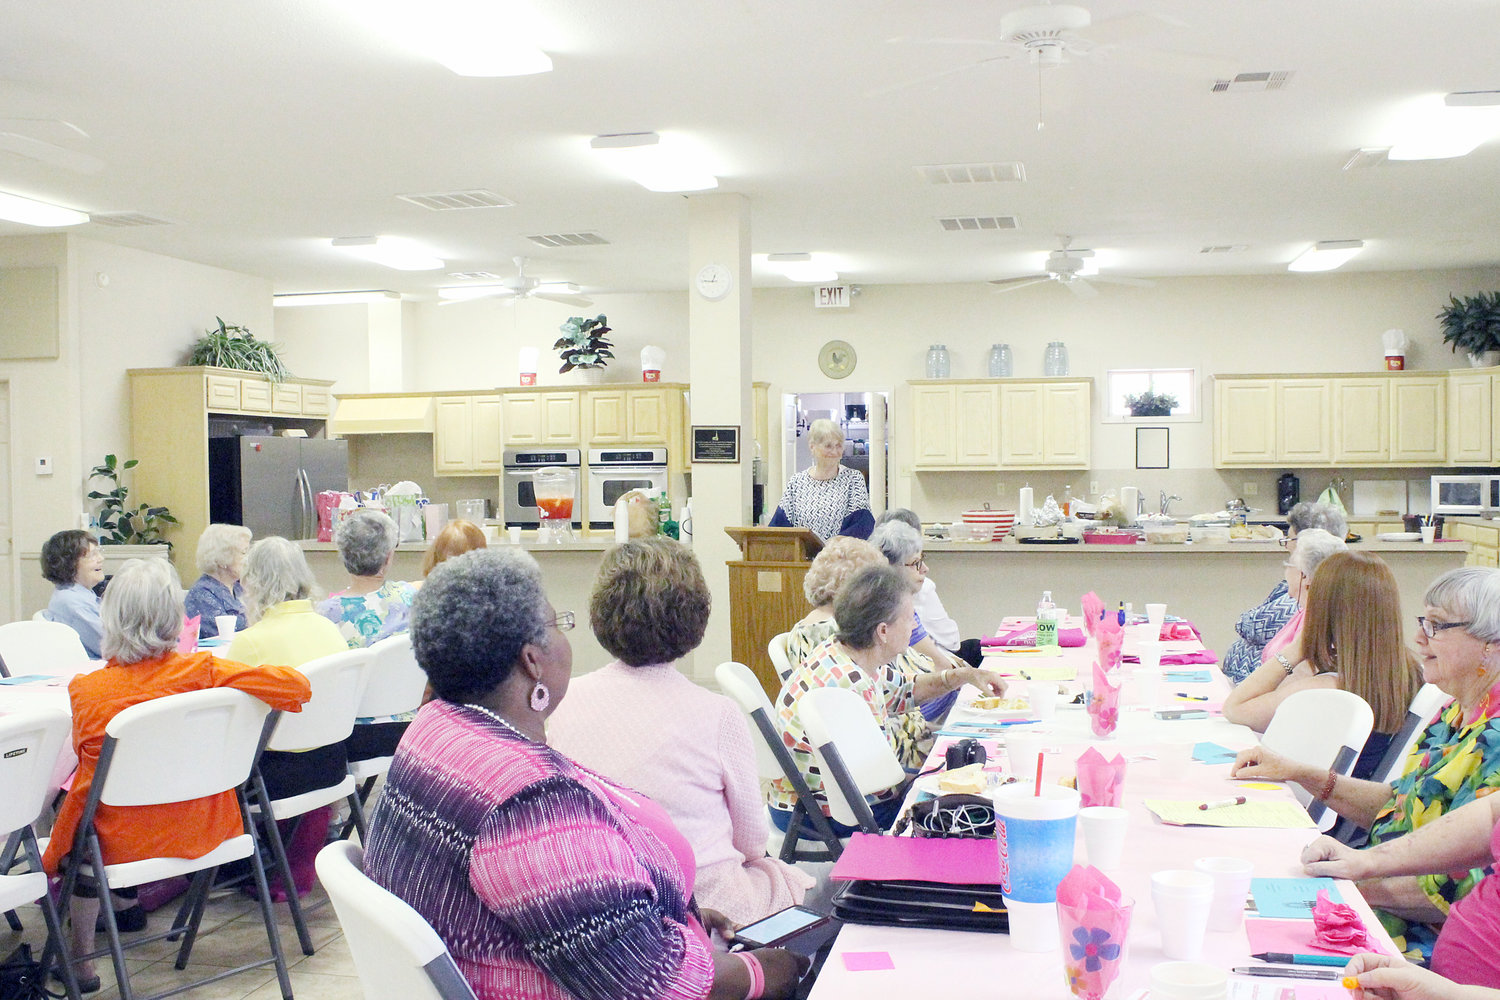 The Women’s Health Program at St. Peter’s Catholic Church in Mineola was well attended Thursday. The TEEA provided decorations and lunch and guest speakers were arranged. Wanda Stephens is at the podium in the background. In the center, foreground, is Pamela Lincoln who told the group that, among other things, the Friend to Friend program could help people with mammograms and pap smears.